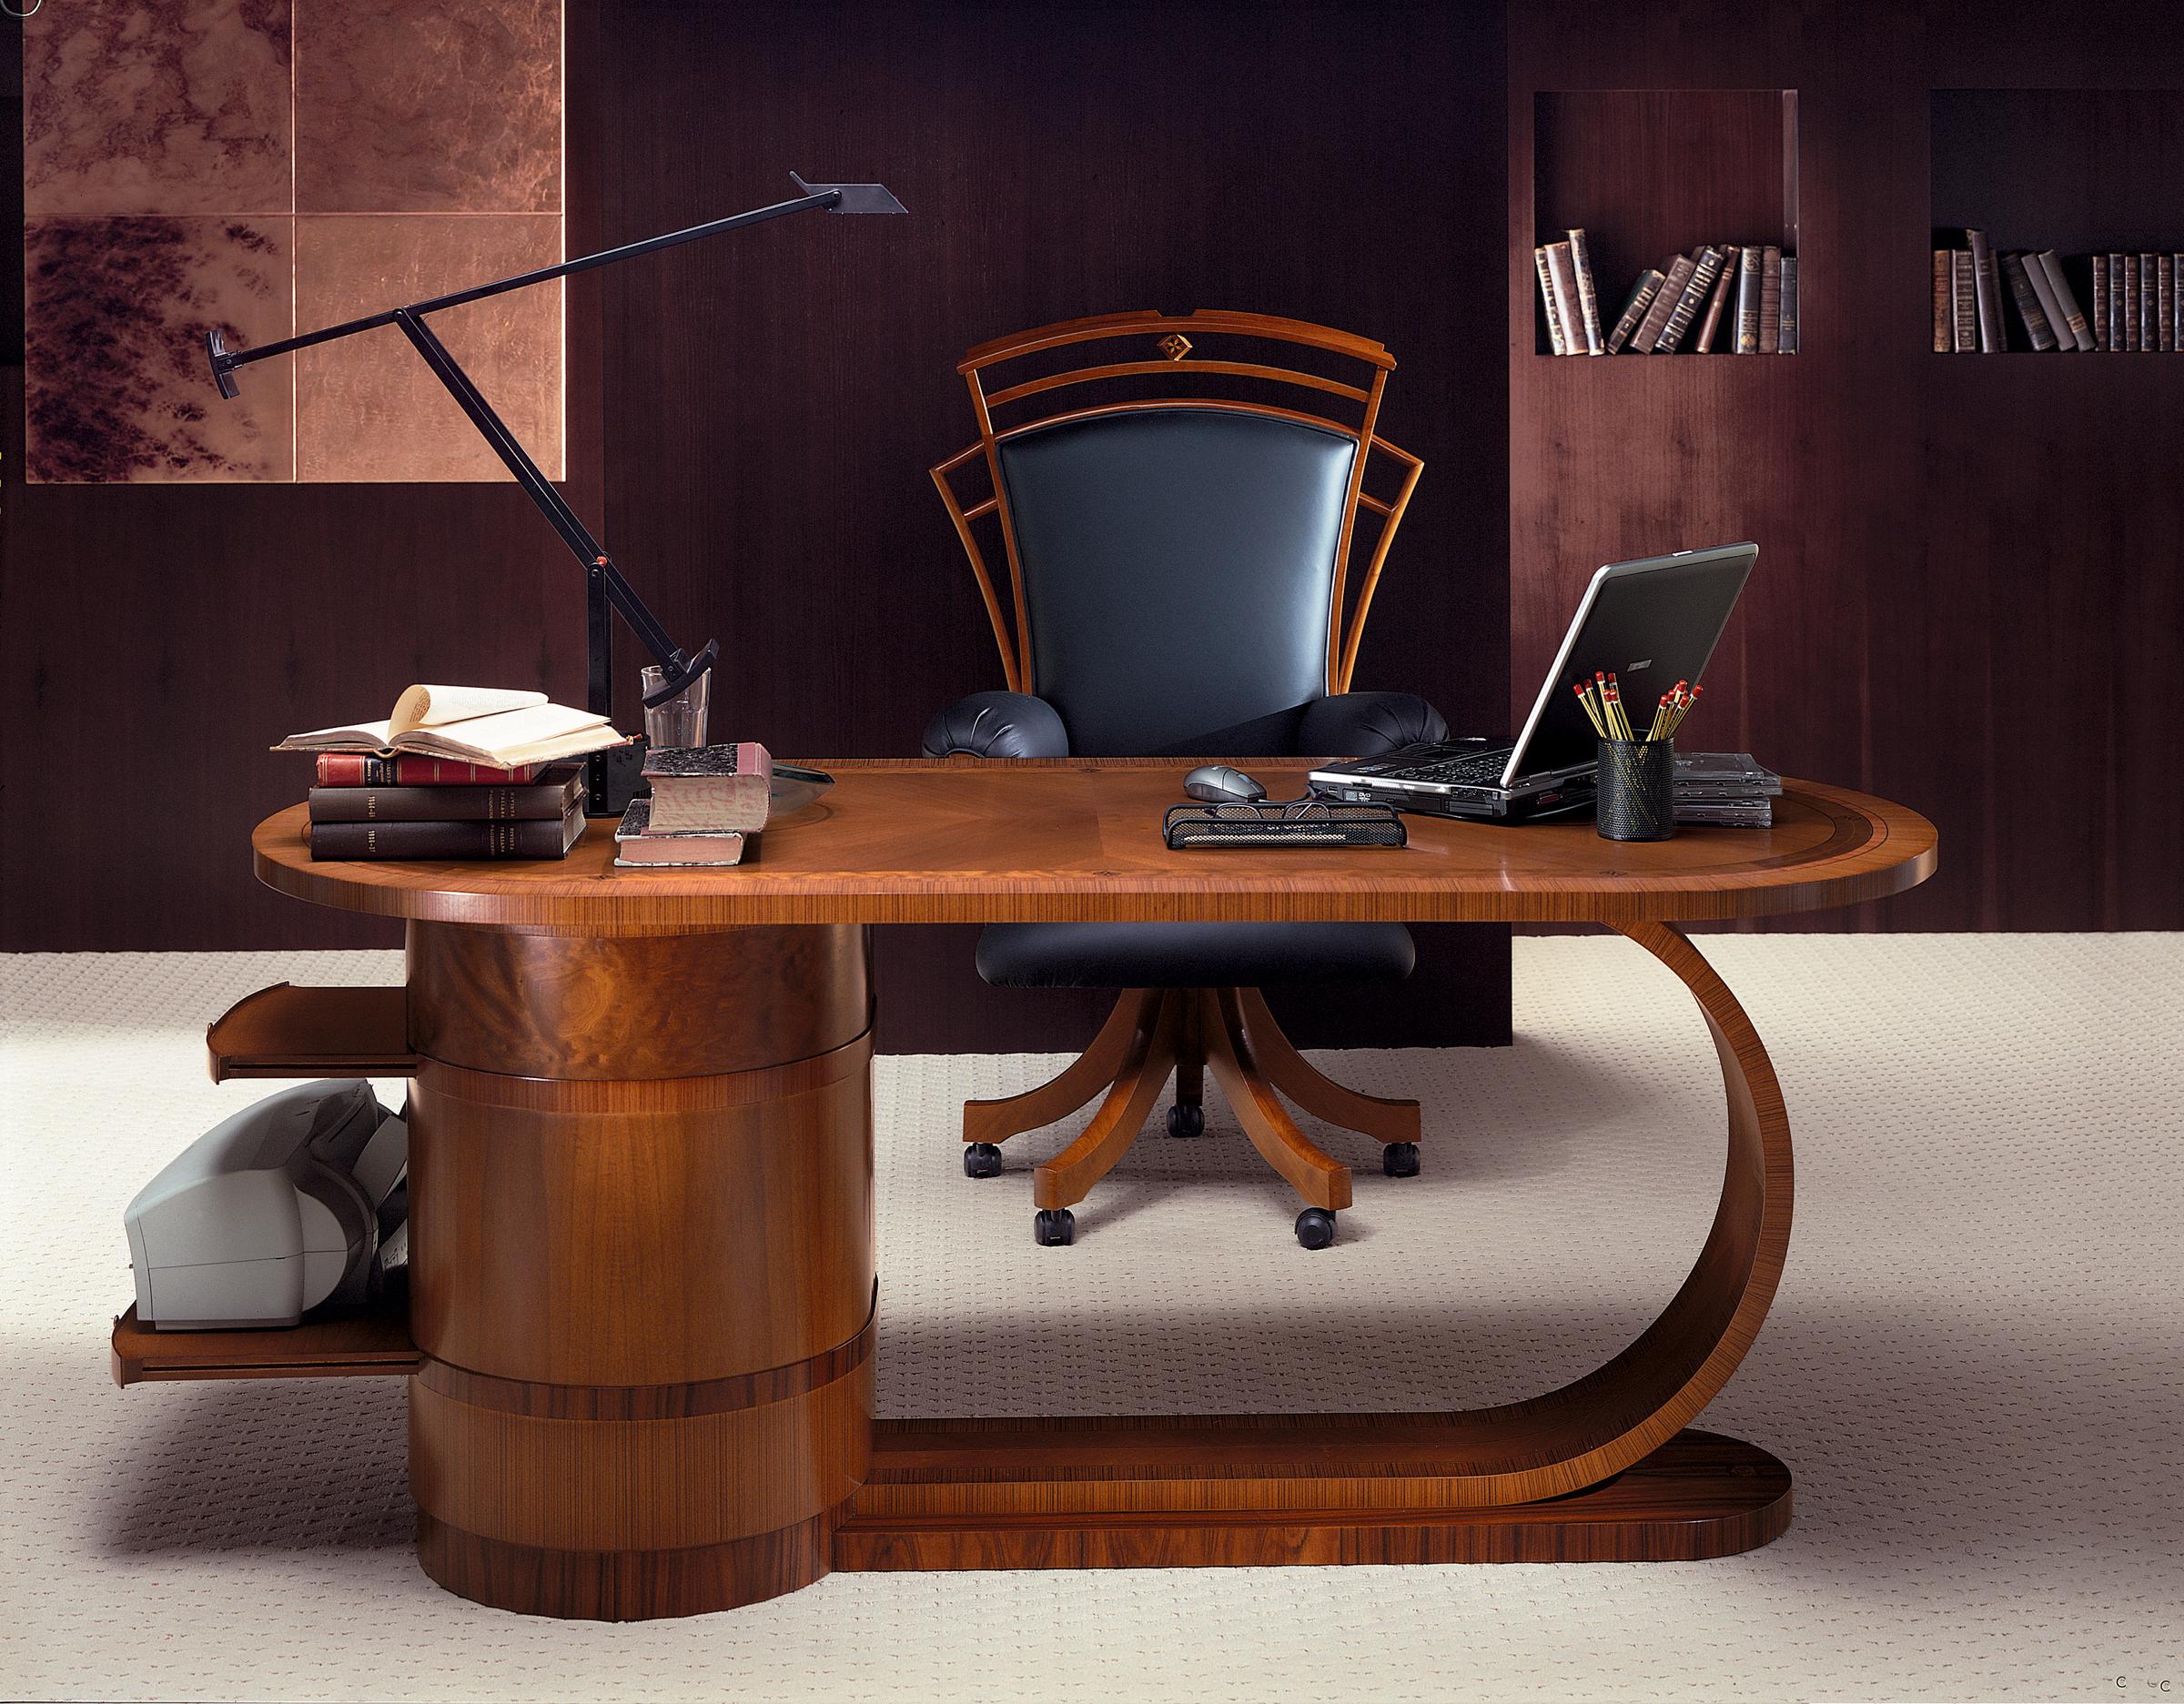 The structure of this elegant writing desk is solid wood plated with cherry-wood, zebrano, briar-wood and other precious woods. In the cylindrical body there are 4 wide drawers with 2 extractable, invisible shelves (they are enclosed in the